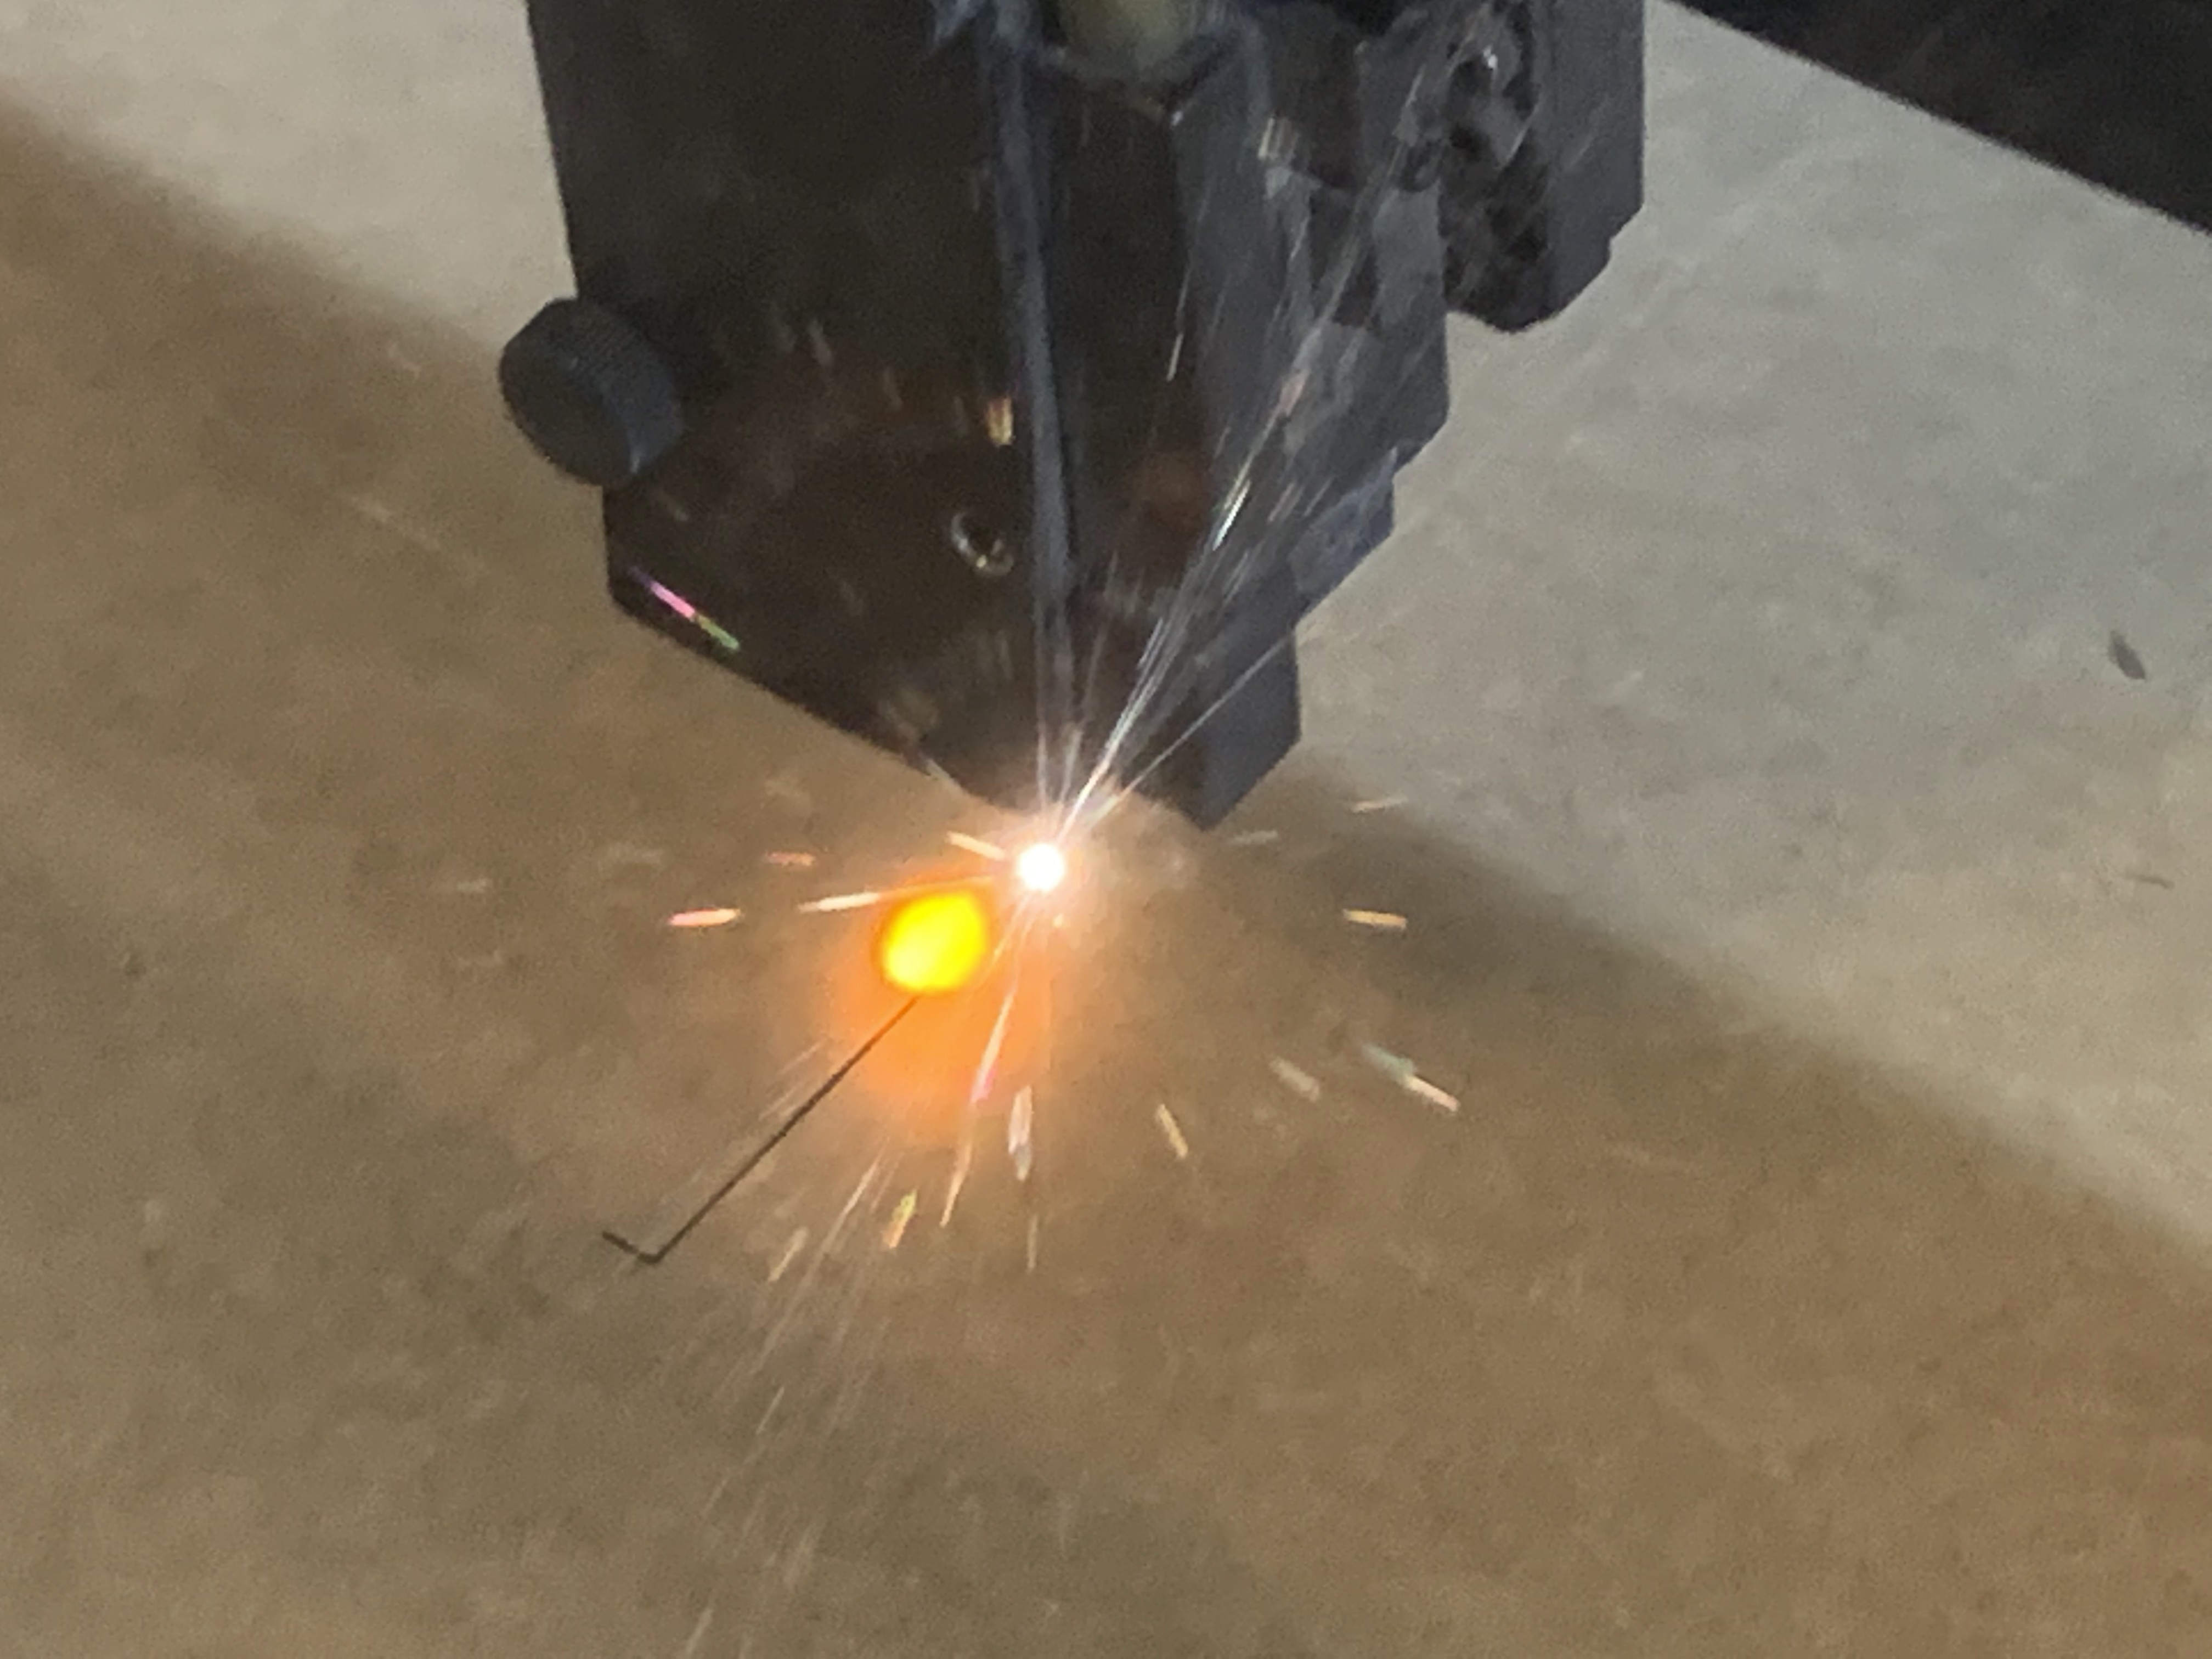 Laser Cutting in Motion